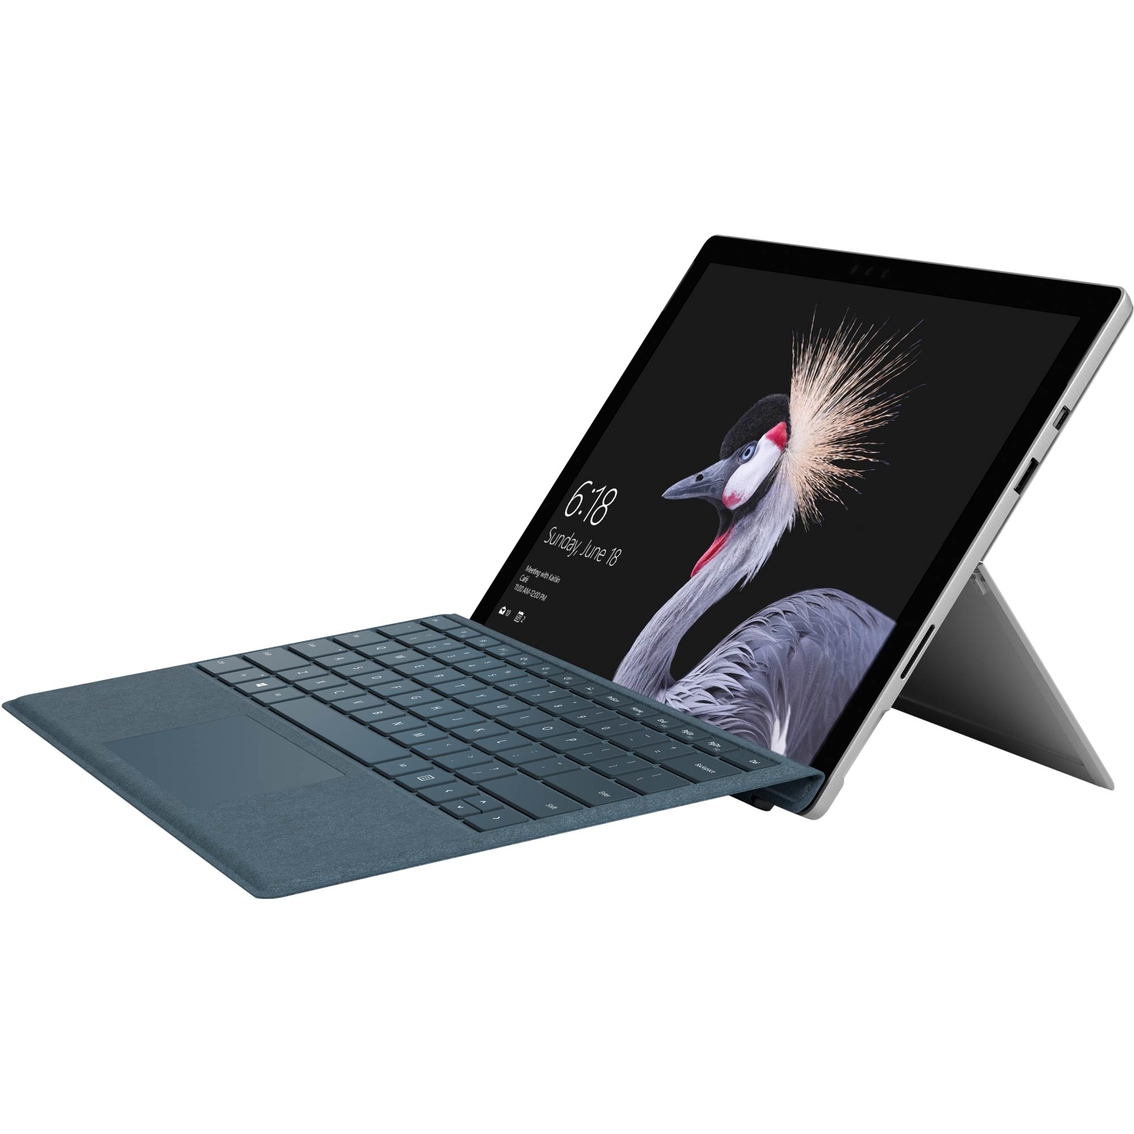 Microsoft Surface Pro 12 3 In Intel Core I5 7300u 2 6ghz 8gb 128gb M1796 Laptops Home Office School Shop The Exchange